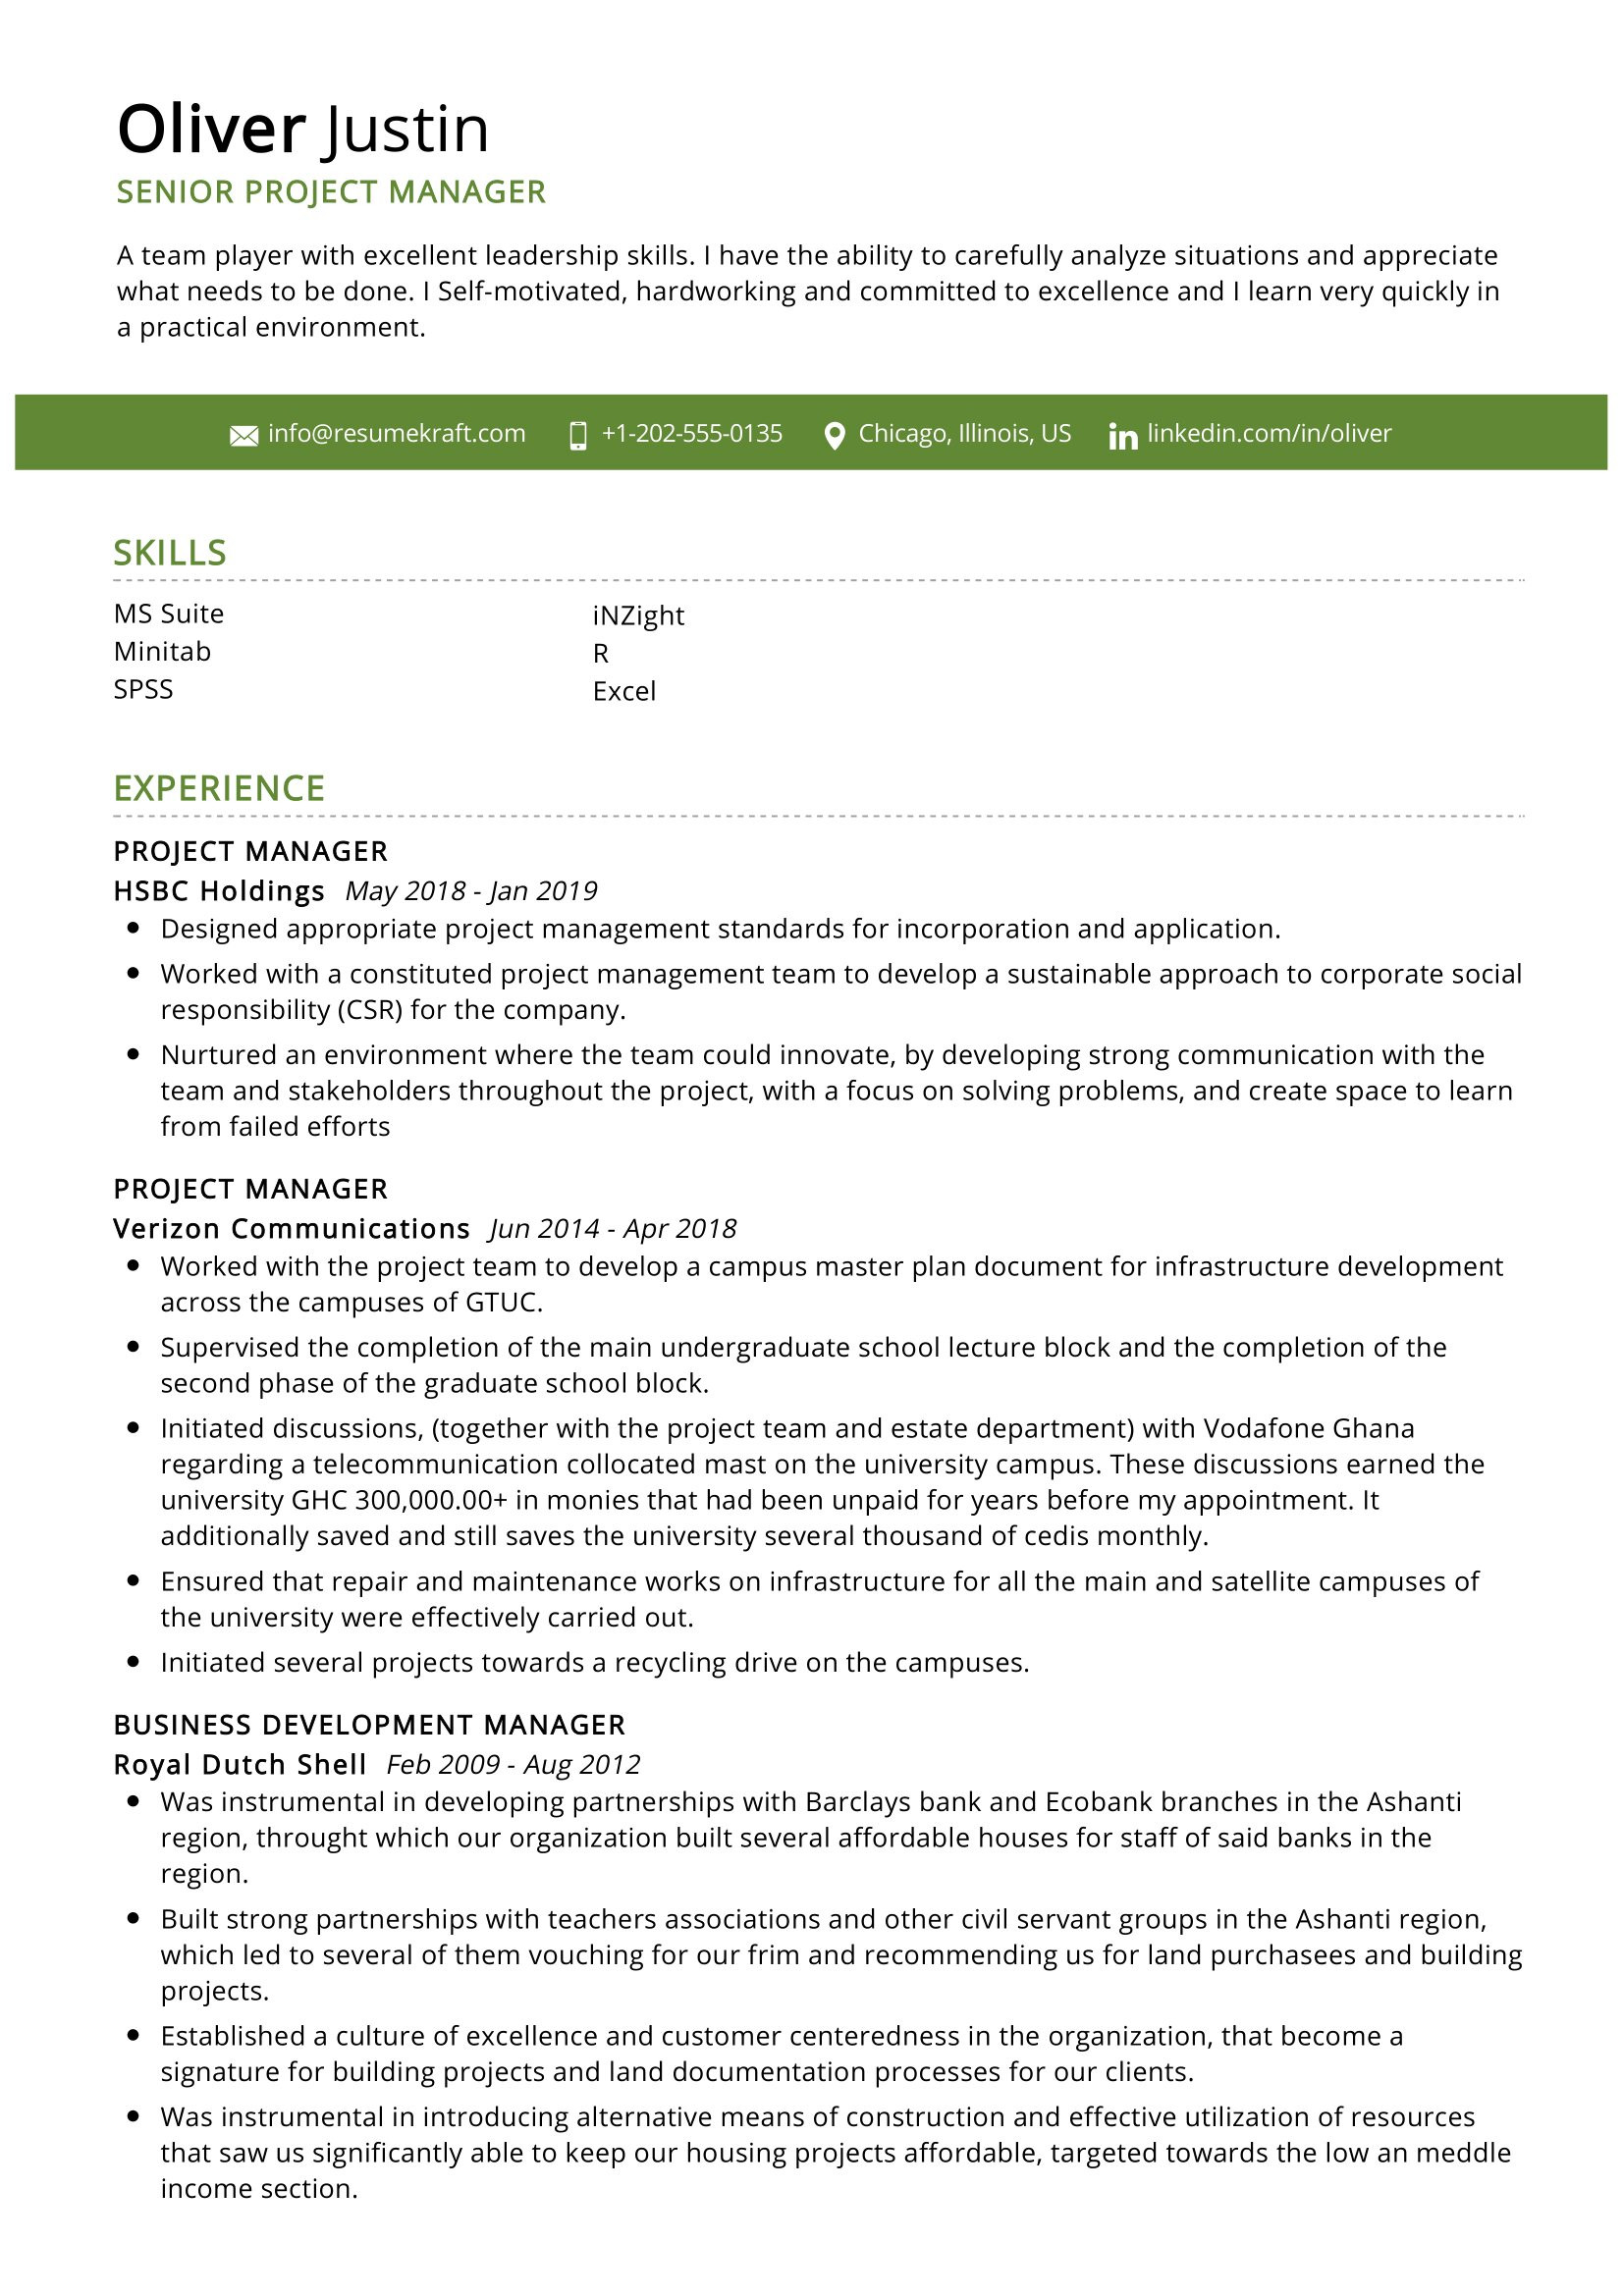 senior project manager resume sample 2